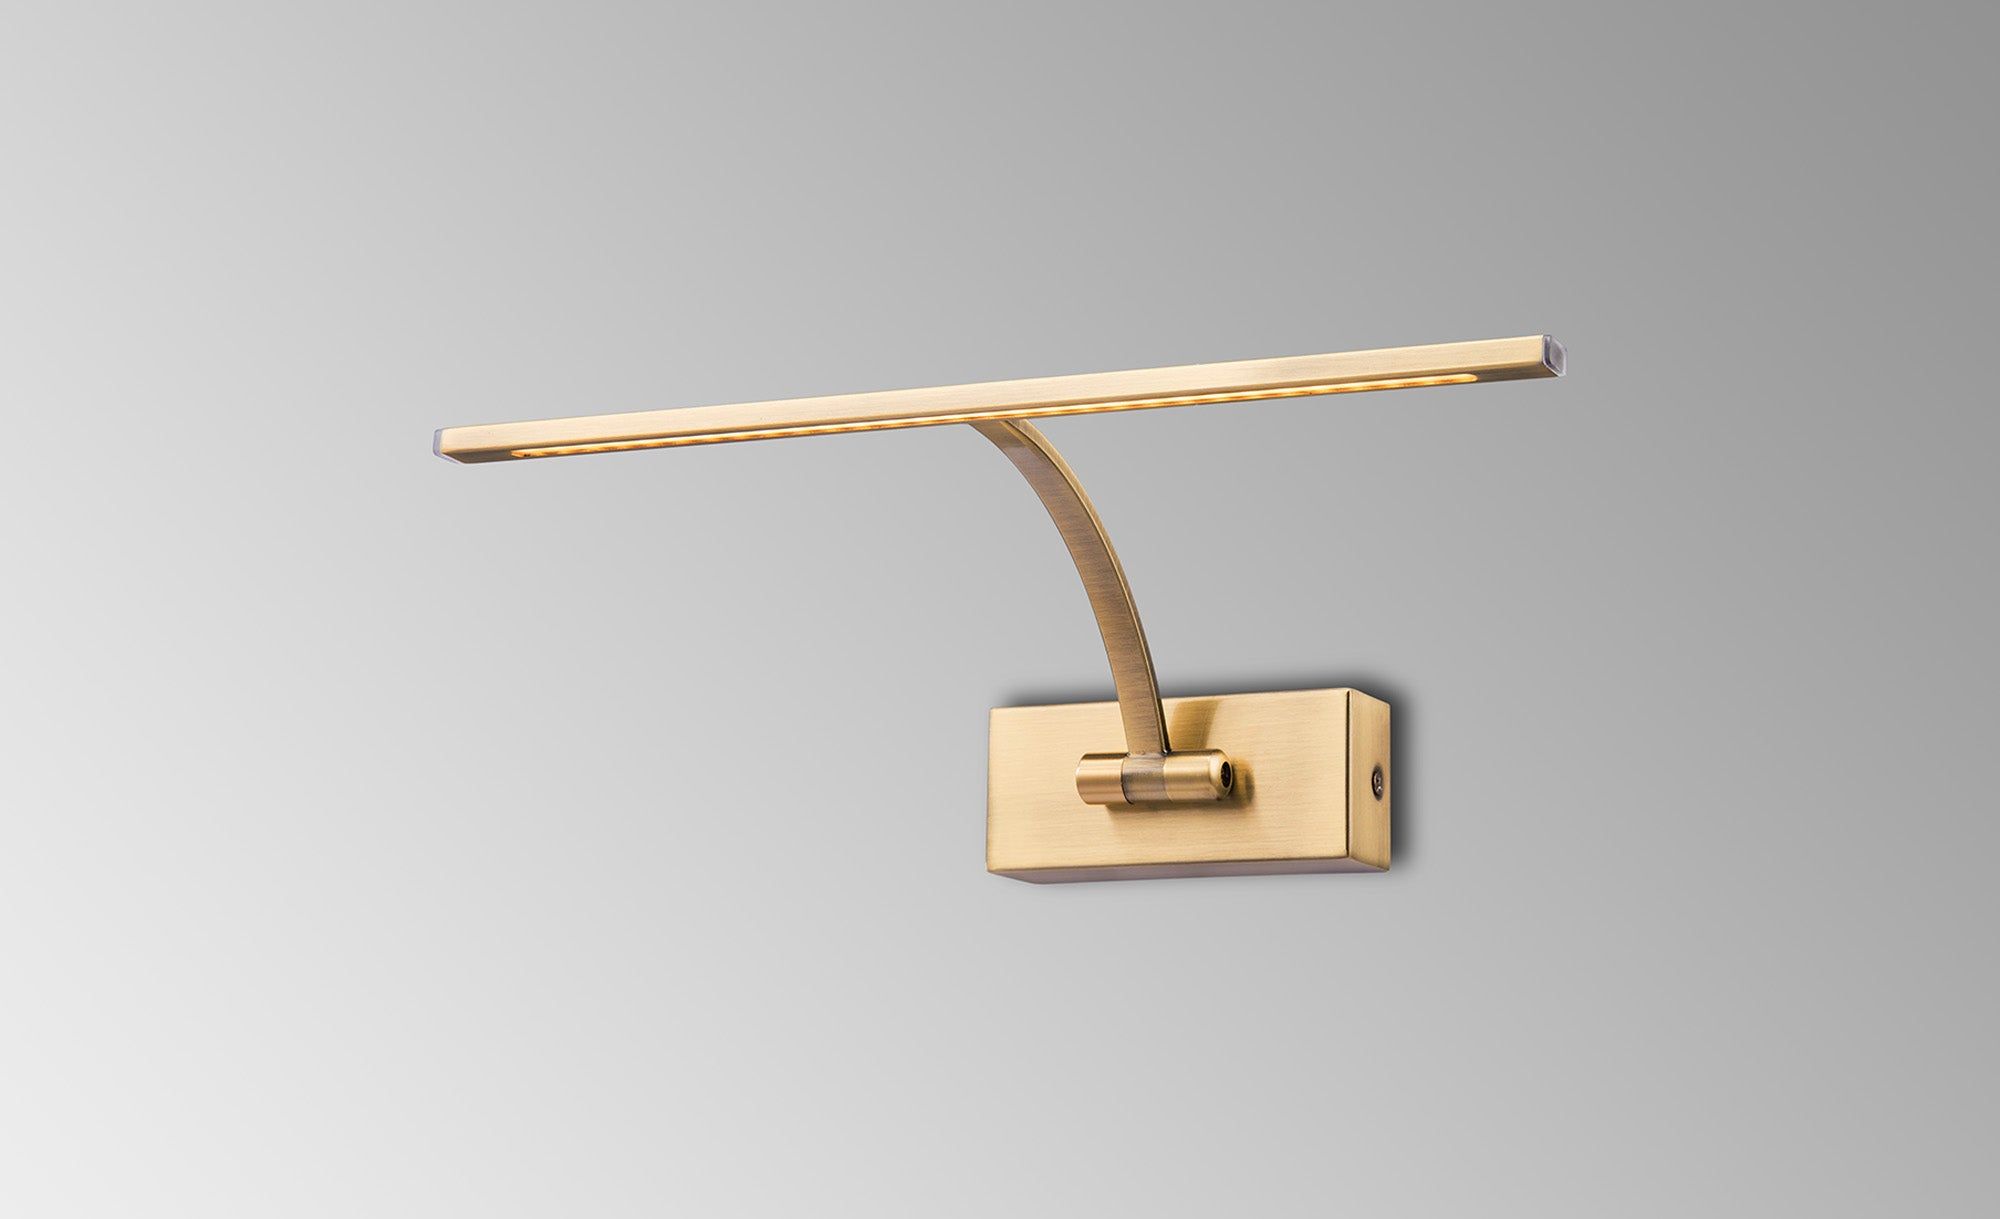 Mia Small 1 Arm Wall Lamp/Picture Light, 1 x 6W LED, 3000K, 470lm, Antique Brass, 3yrs Warranty